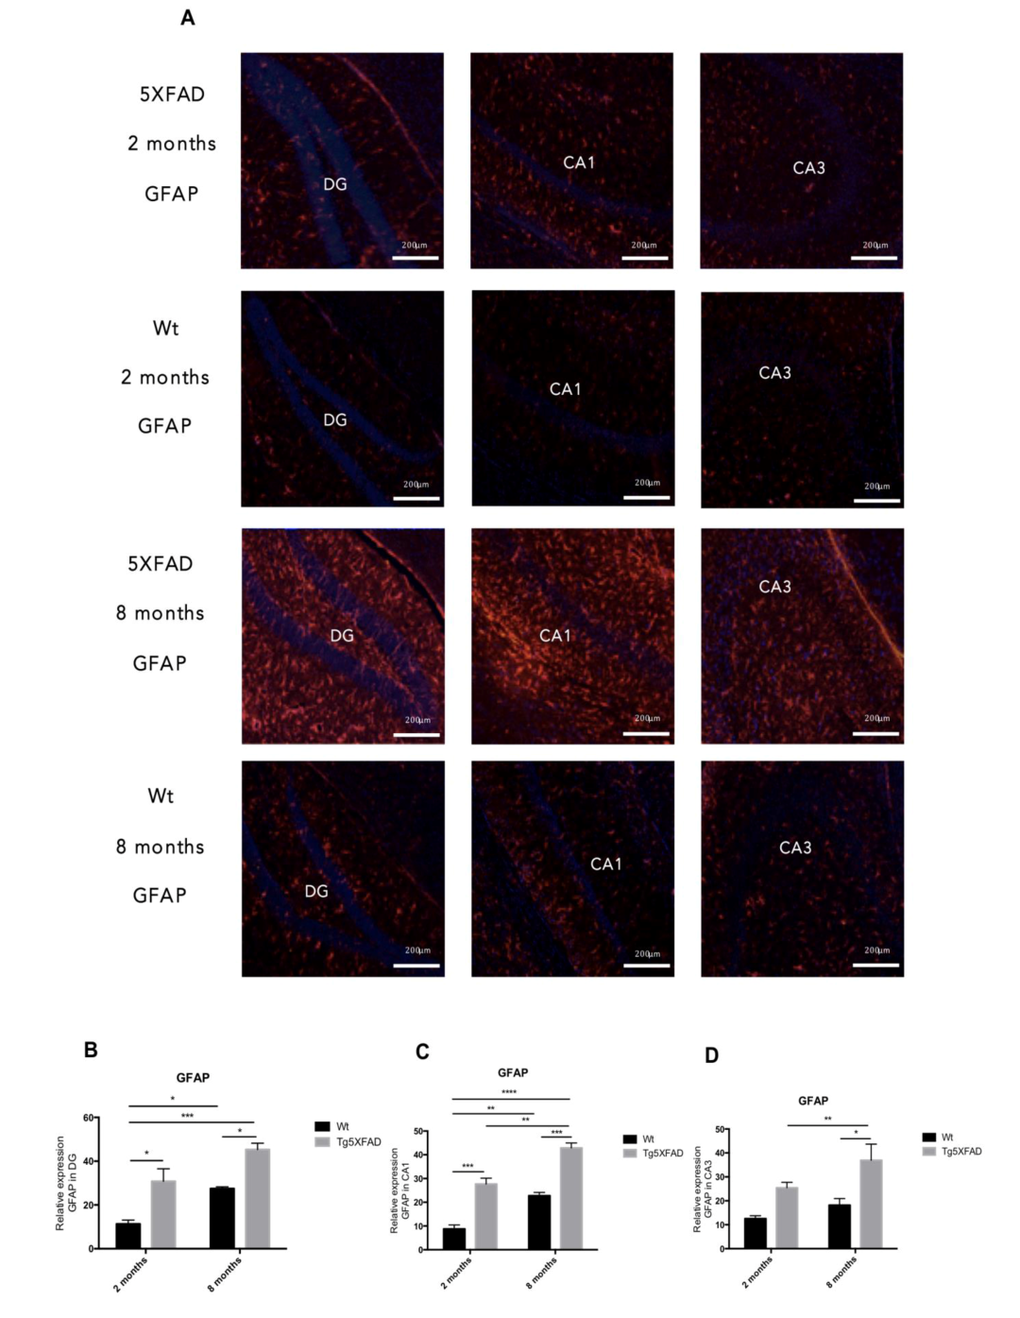 Representative images for GFAP immunostaining (A) and quantification on the bar chart (B-D) in female mice aged 2 and 8 months (Wt and 5XFAD). Bars represent mean ± Standard Error of the Mean (SEM); (n = 4 for each group). ***p